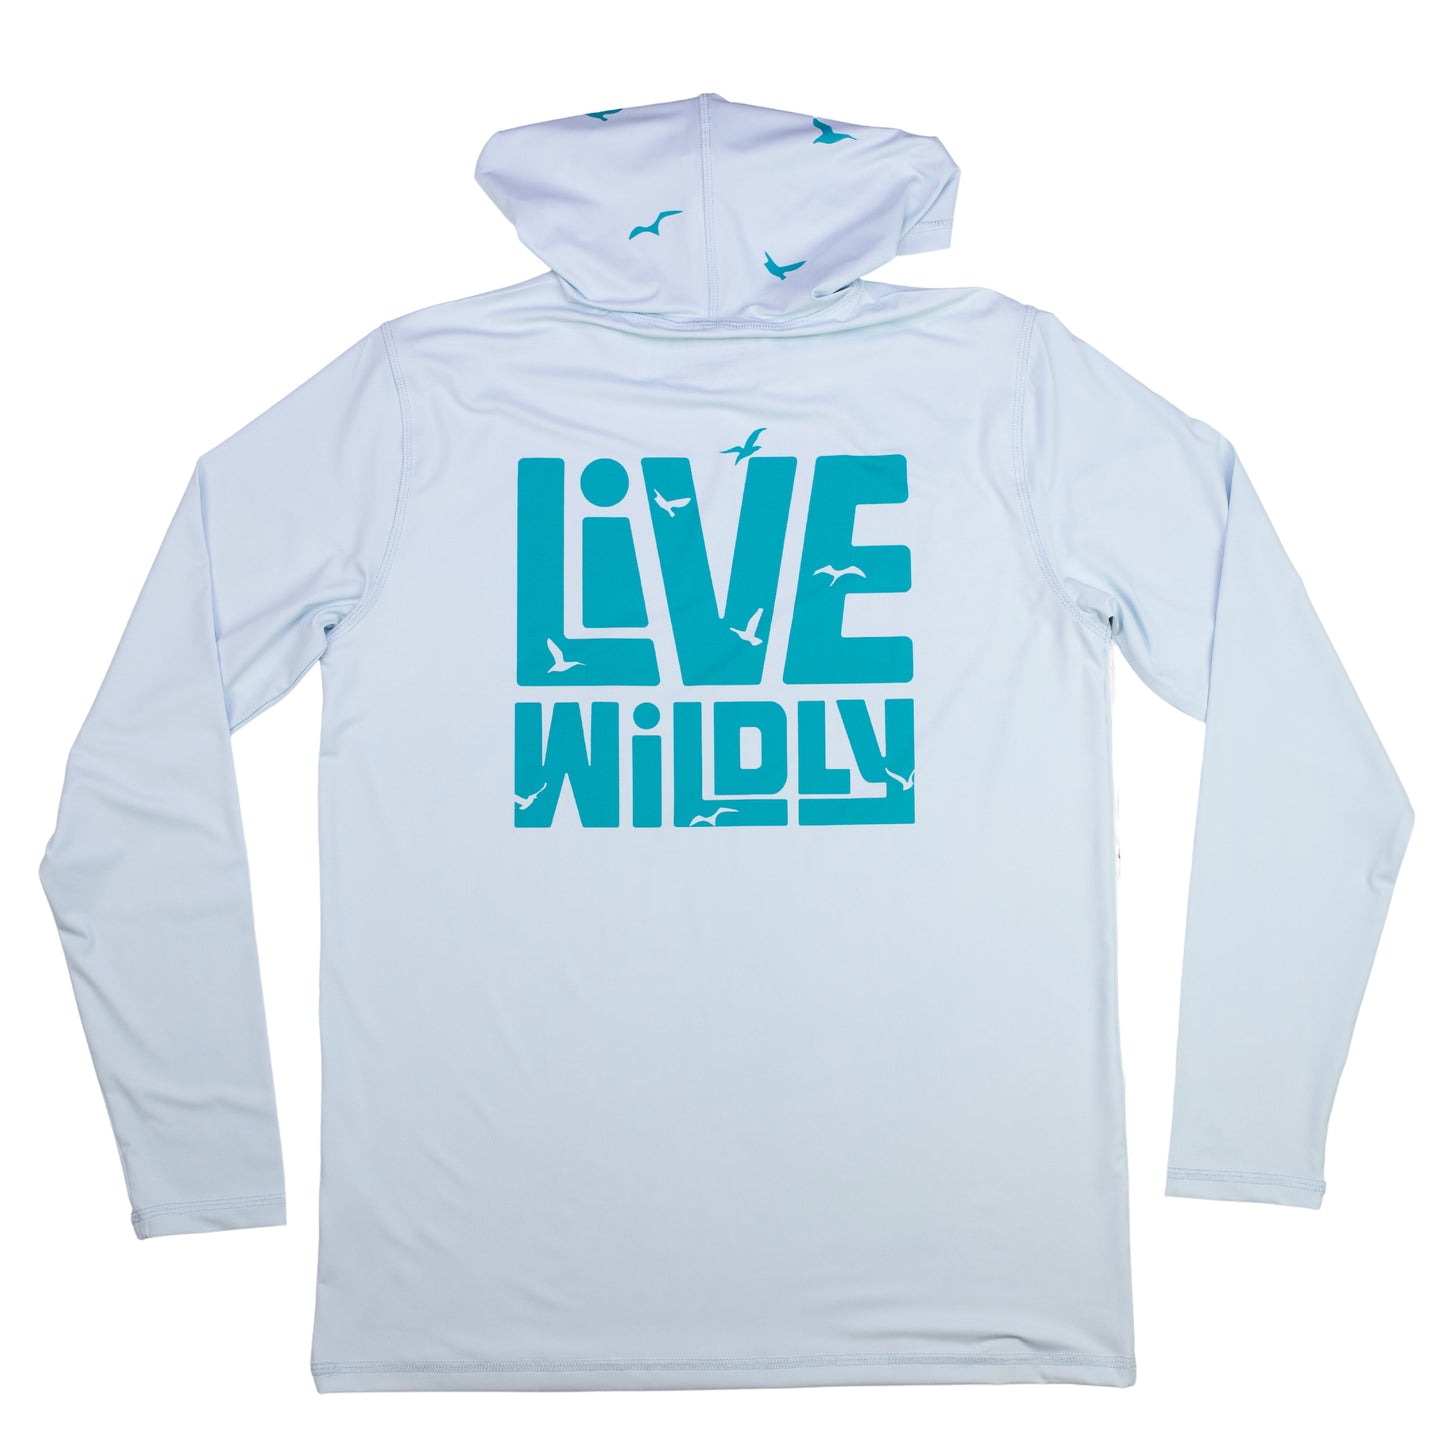 Live Wildly Unisex UPF 50+ Performance Shirt - Spring Blue - Centered Front - Live Wildly 